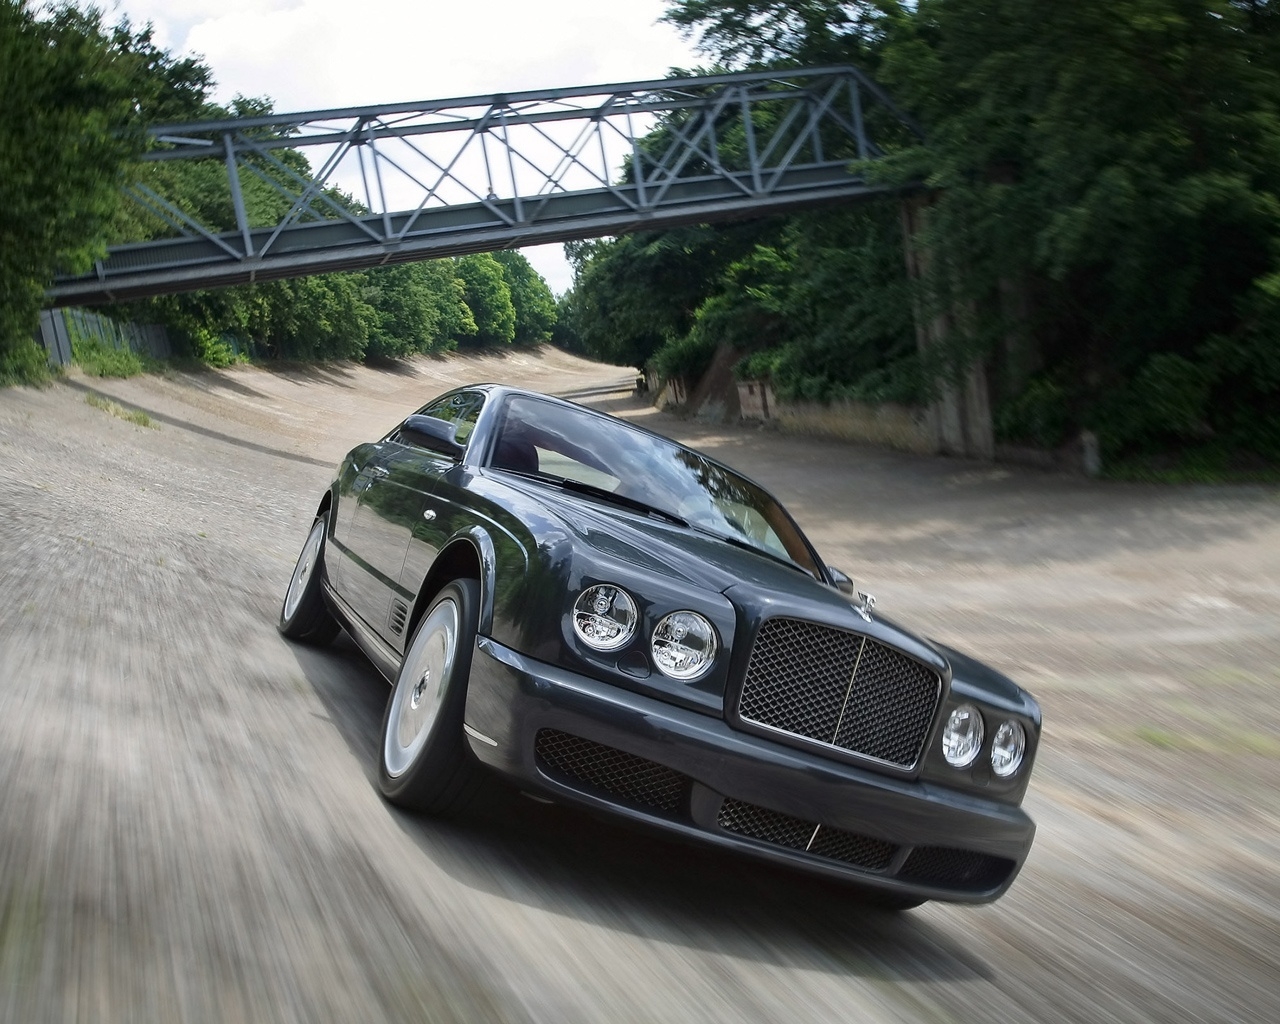 Bentley Brooklands Coupe 2008 for 1280 x 1024 resolution